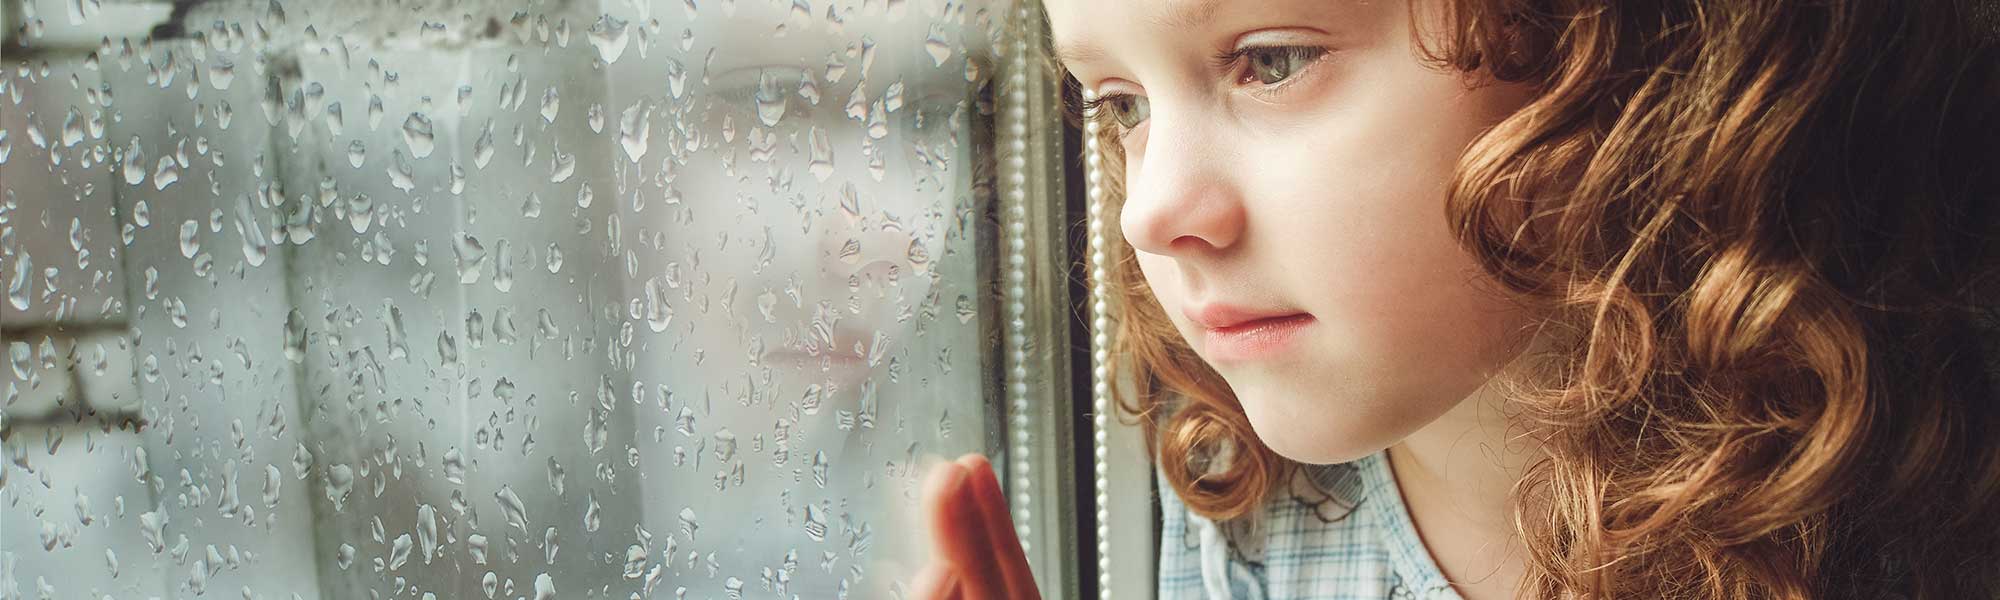 sad child looking out window